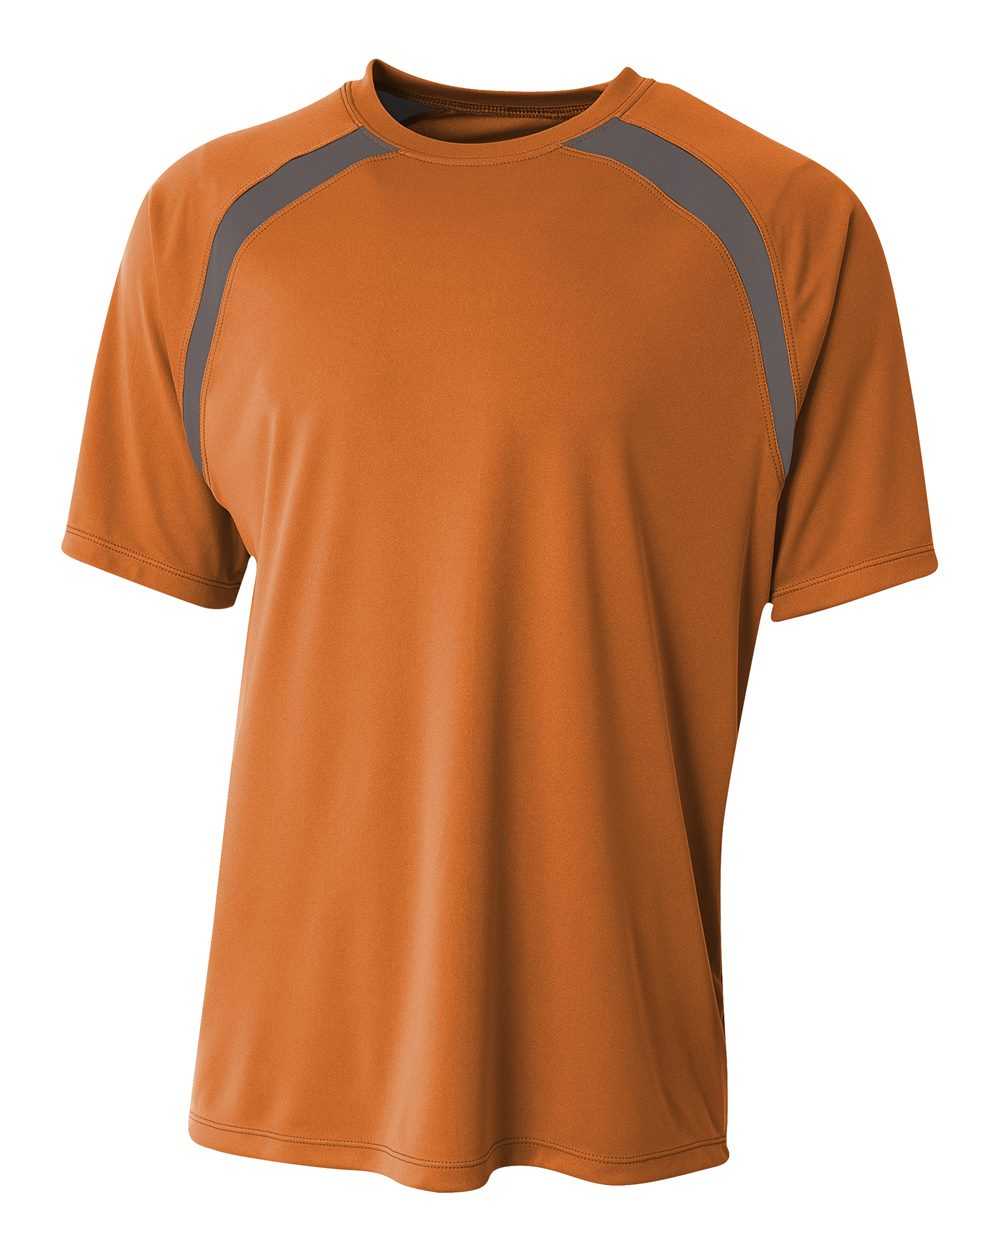 A4 NB3001 Youth Spartan Short Sleeve Color Block Crew - Orange Graphite - HIT a Double